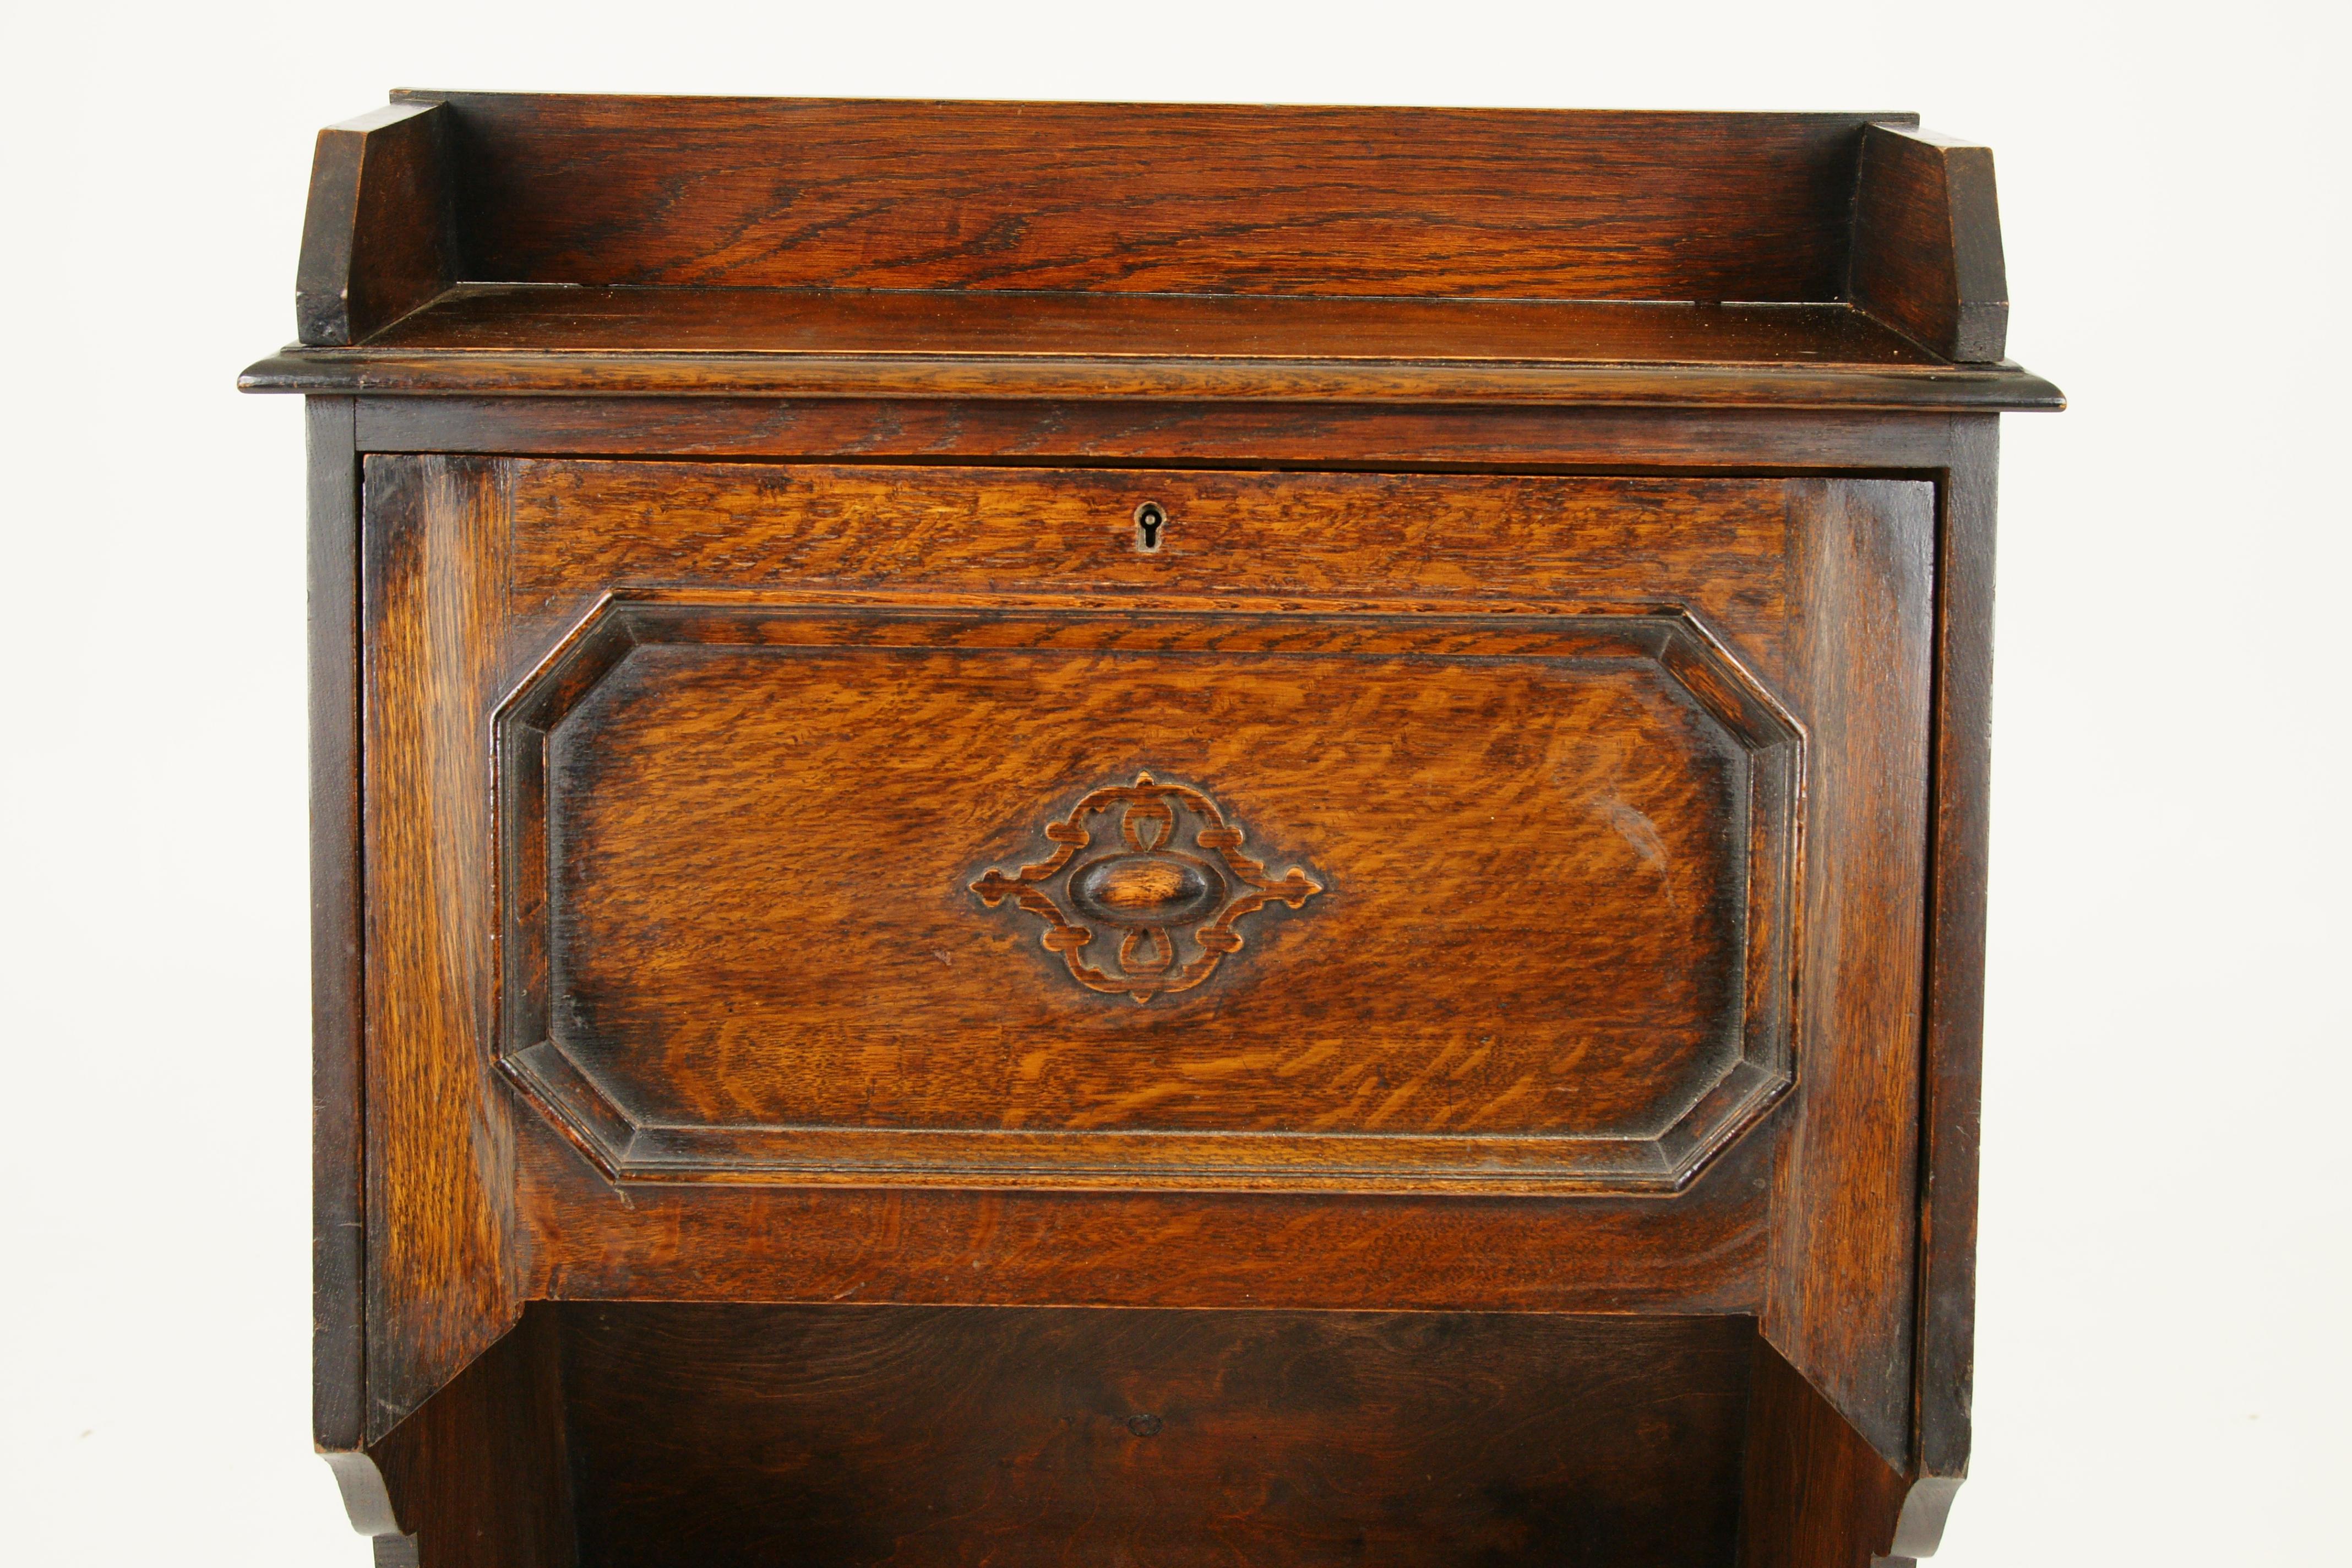 Antique oak Arts & Crafts slant drop front desk bookcase Scotland 1910 B1650

Scotland 1910
Solid oak
Original finish
Shaped gallery top above a fall front paneled front
Opens to reveal a writing surface
Pigeon holes inside with pen